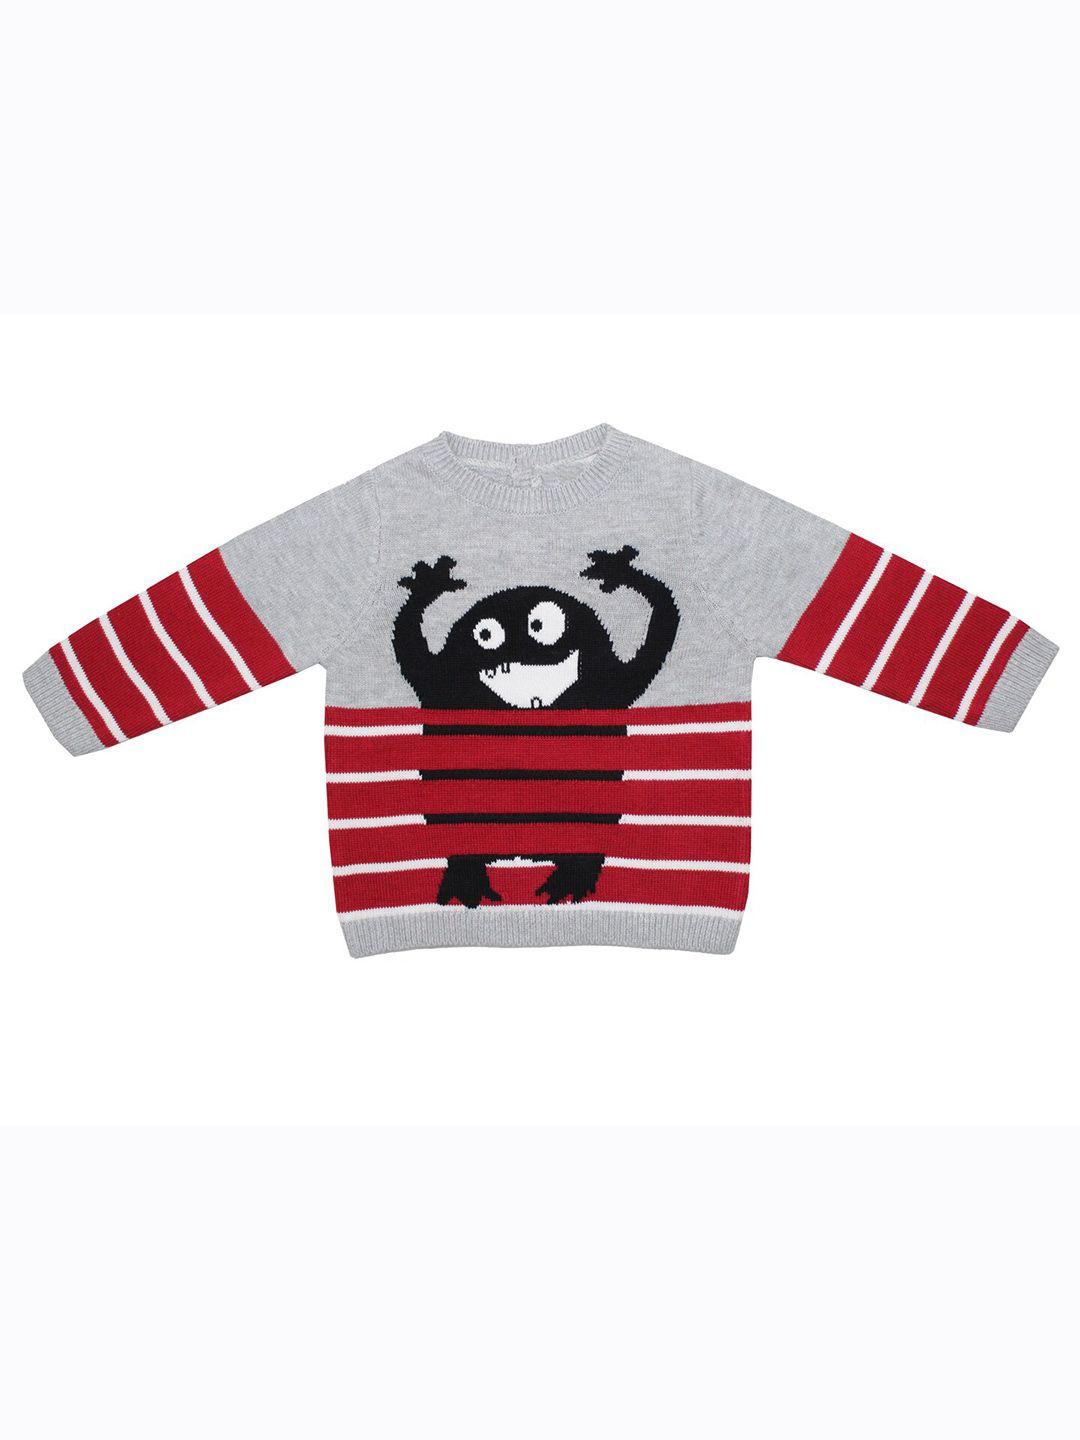 JWAAQ Boys Grey & Red Typography Printed Pullover